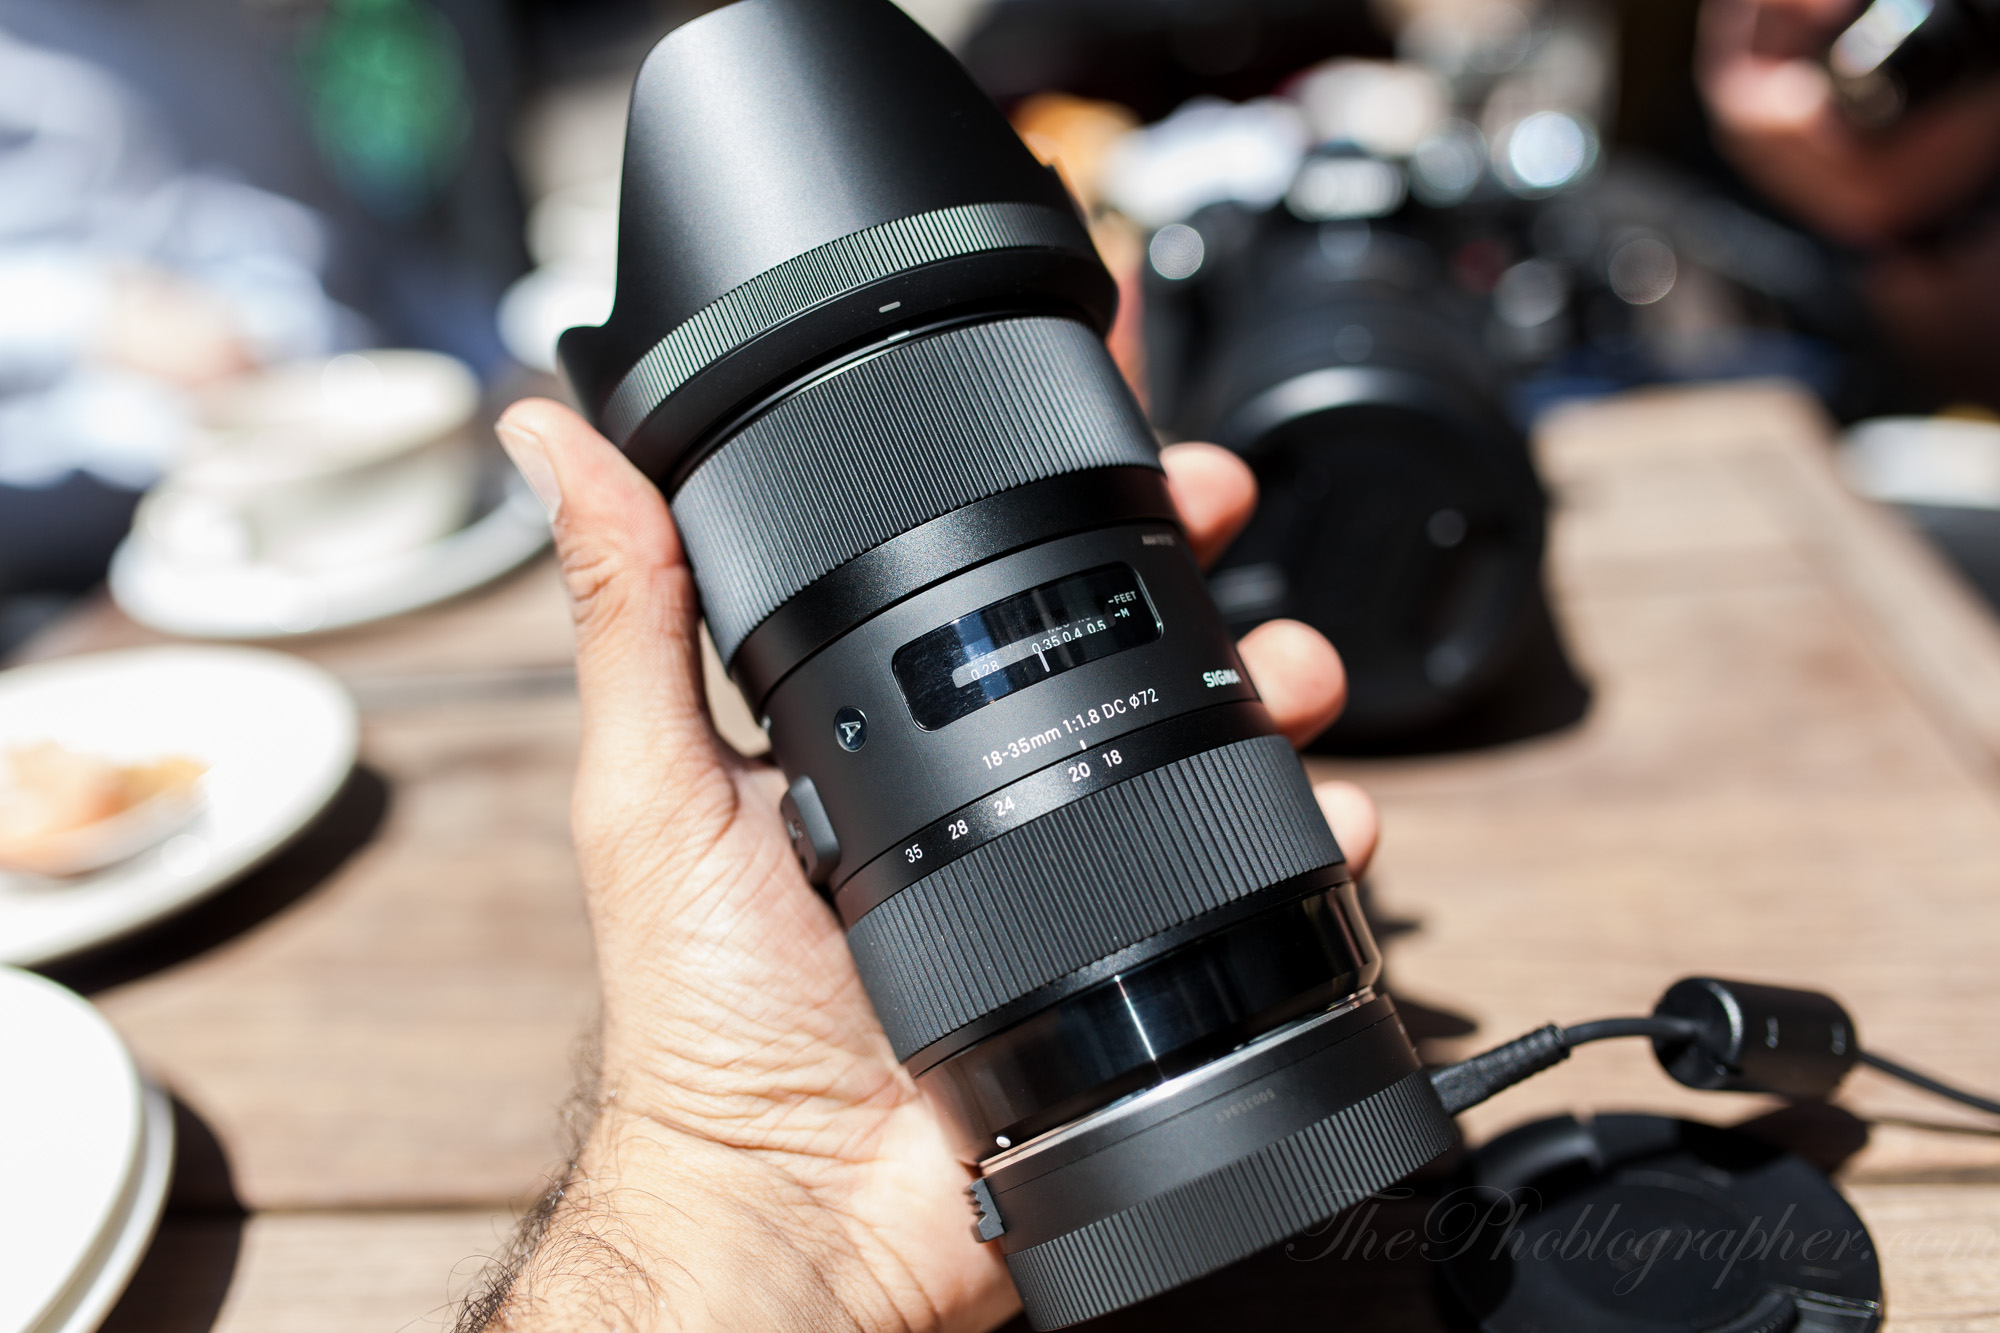 First Impressions: Sigma 18-35mm f1.8 DC HSM (Canon EF-S) - The